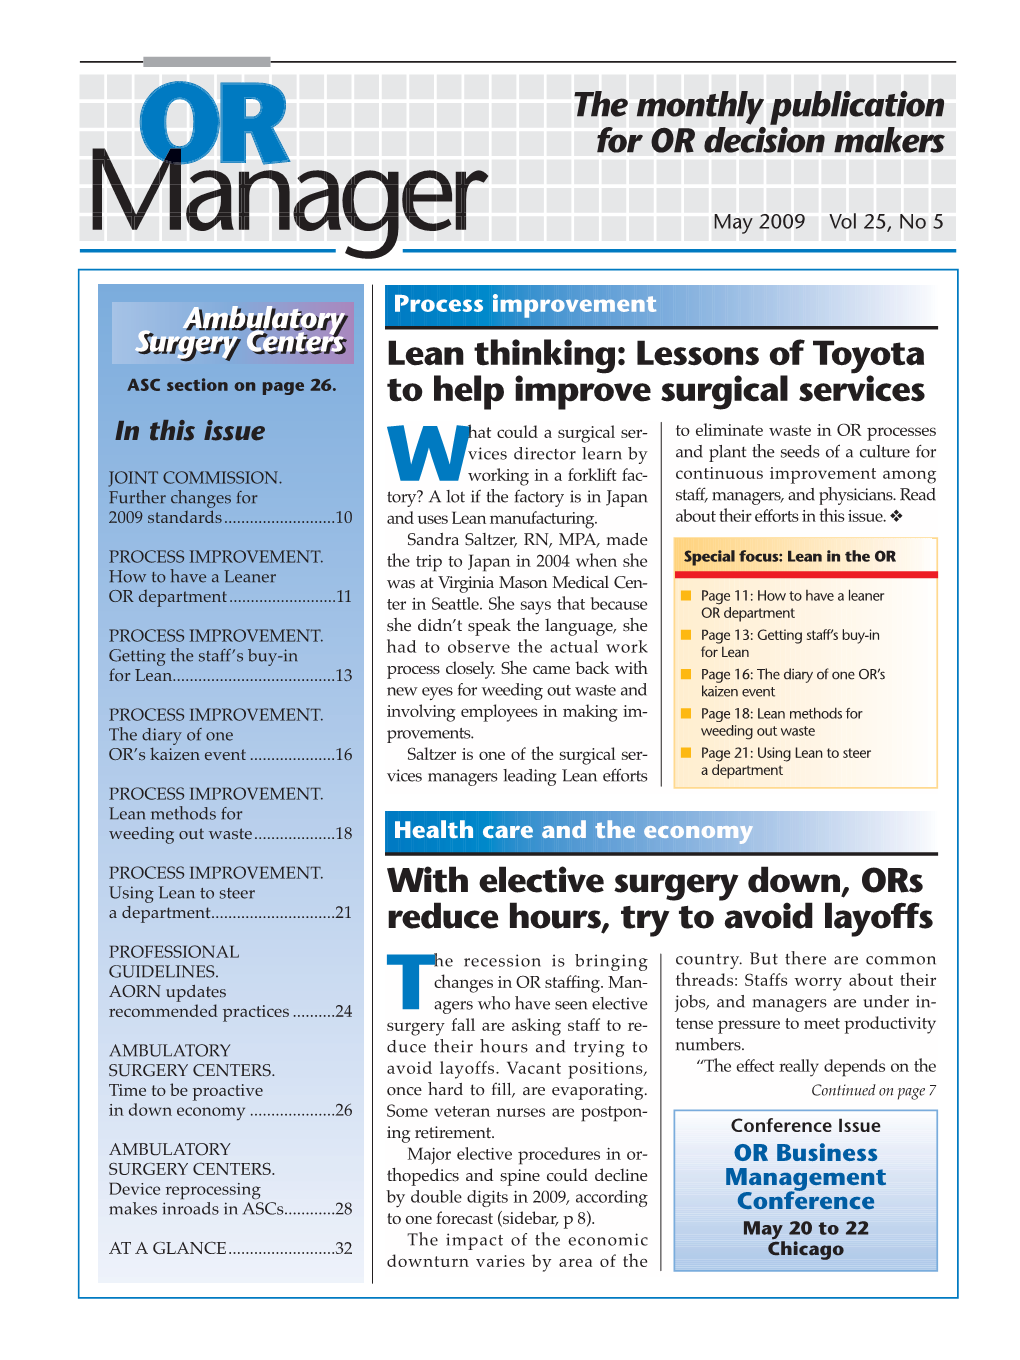 The Monthly Publication for OR Decision Makers